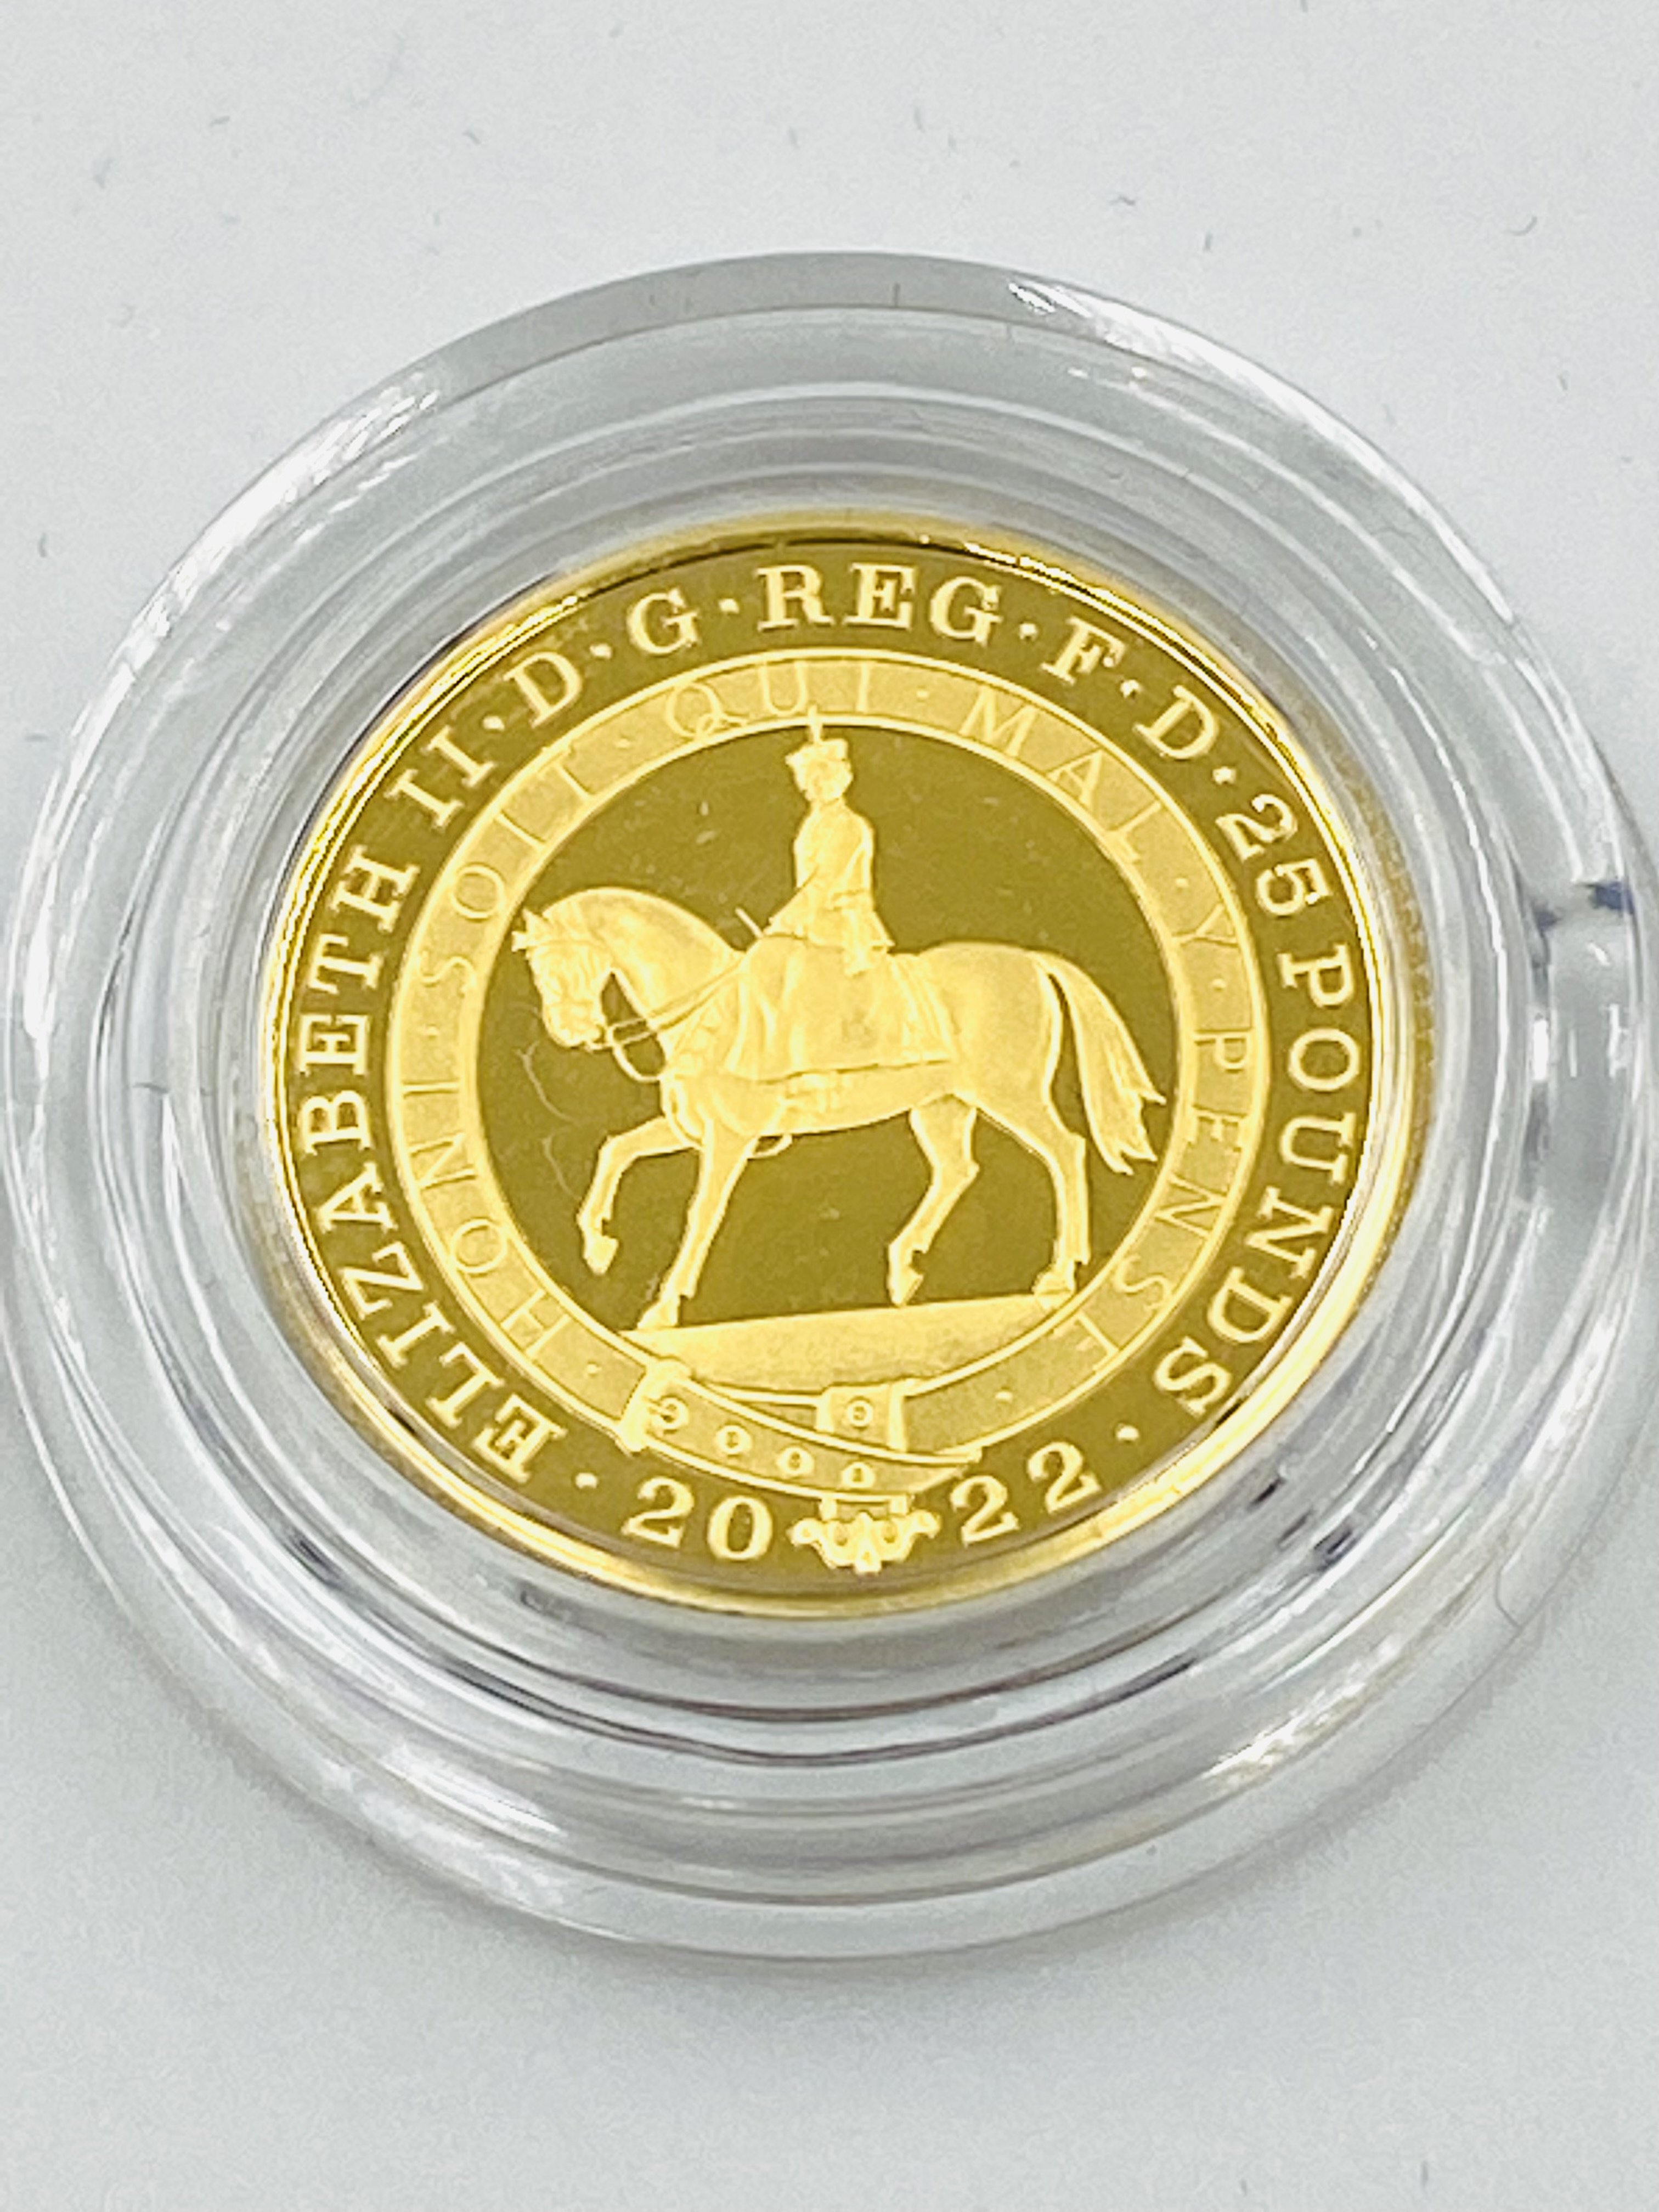 Royal Mint Platinum Jubilee of Her Majesty the Queen, 2022 limited edition gold proof coin - Image 3 of 4